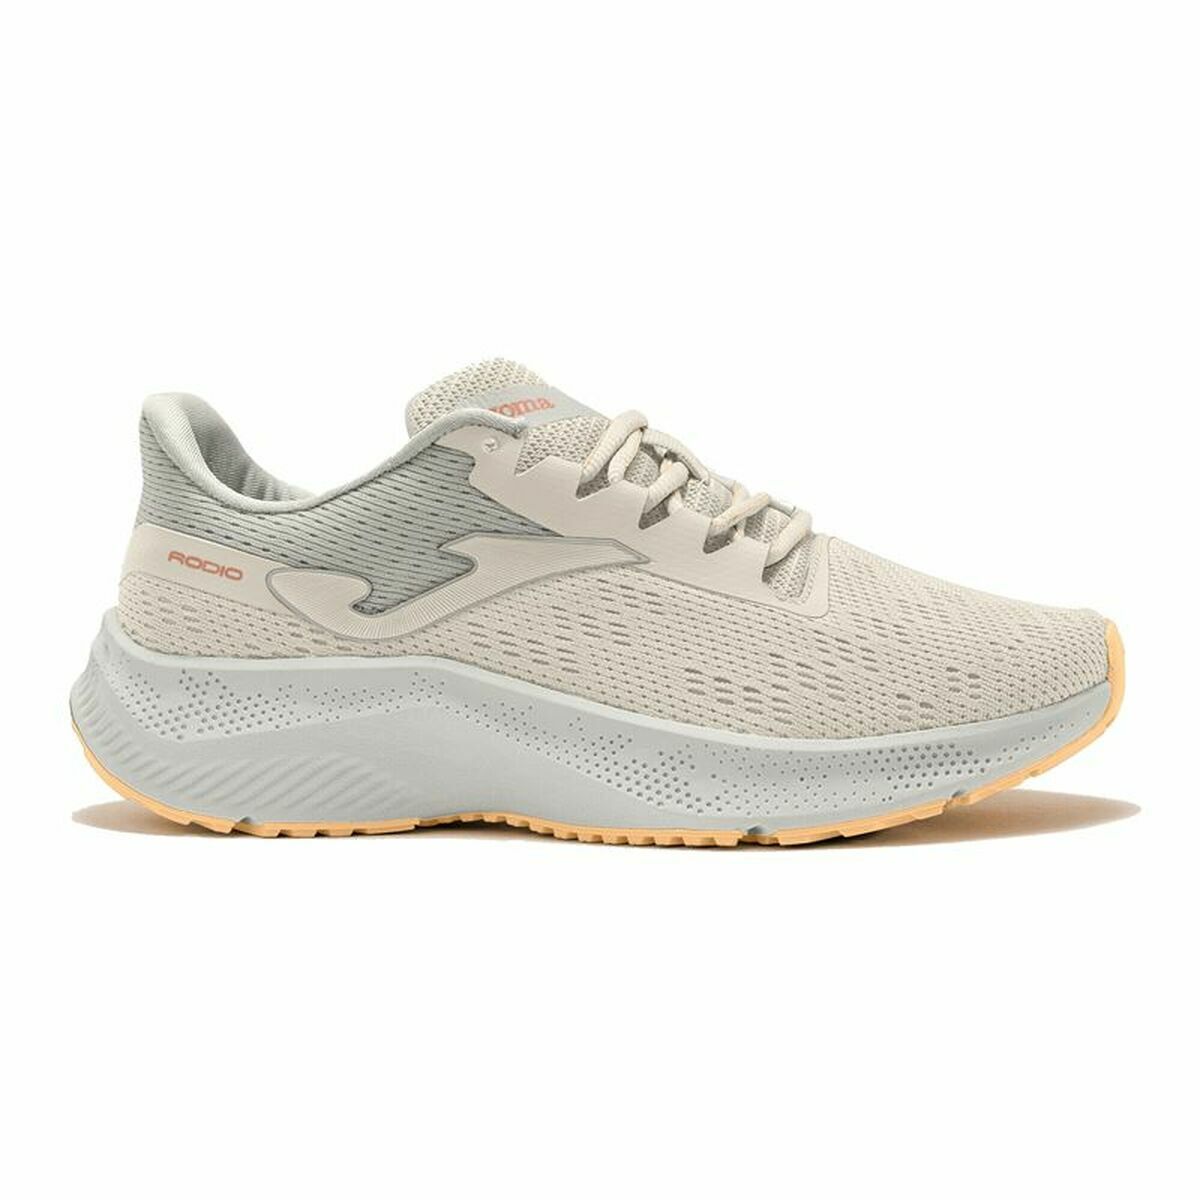 Sports Trainers for Women Joma Sport Rodio 22 Beige